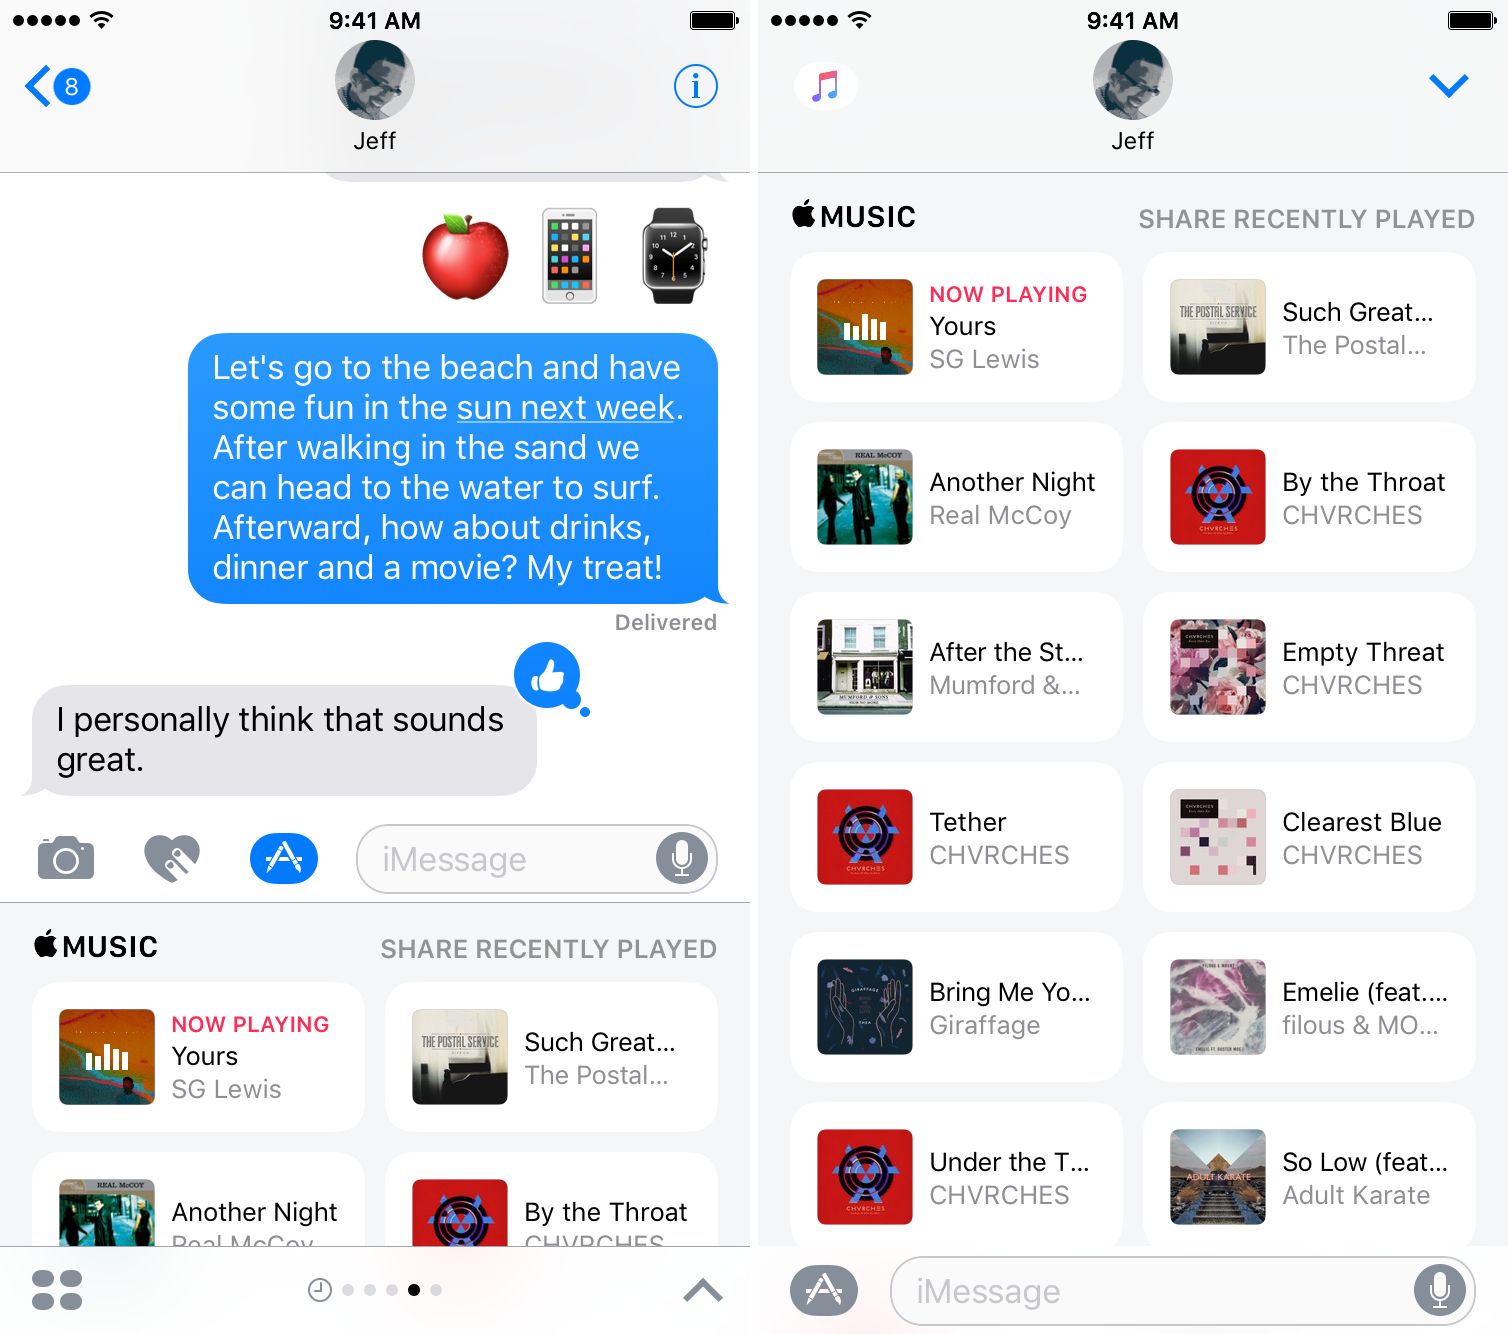 presentation-styles-compact-expanded-imessage-ios-10